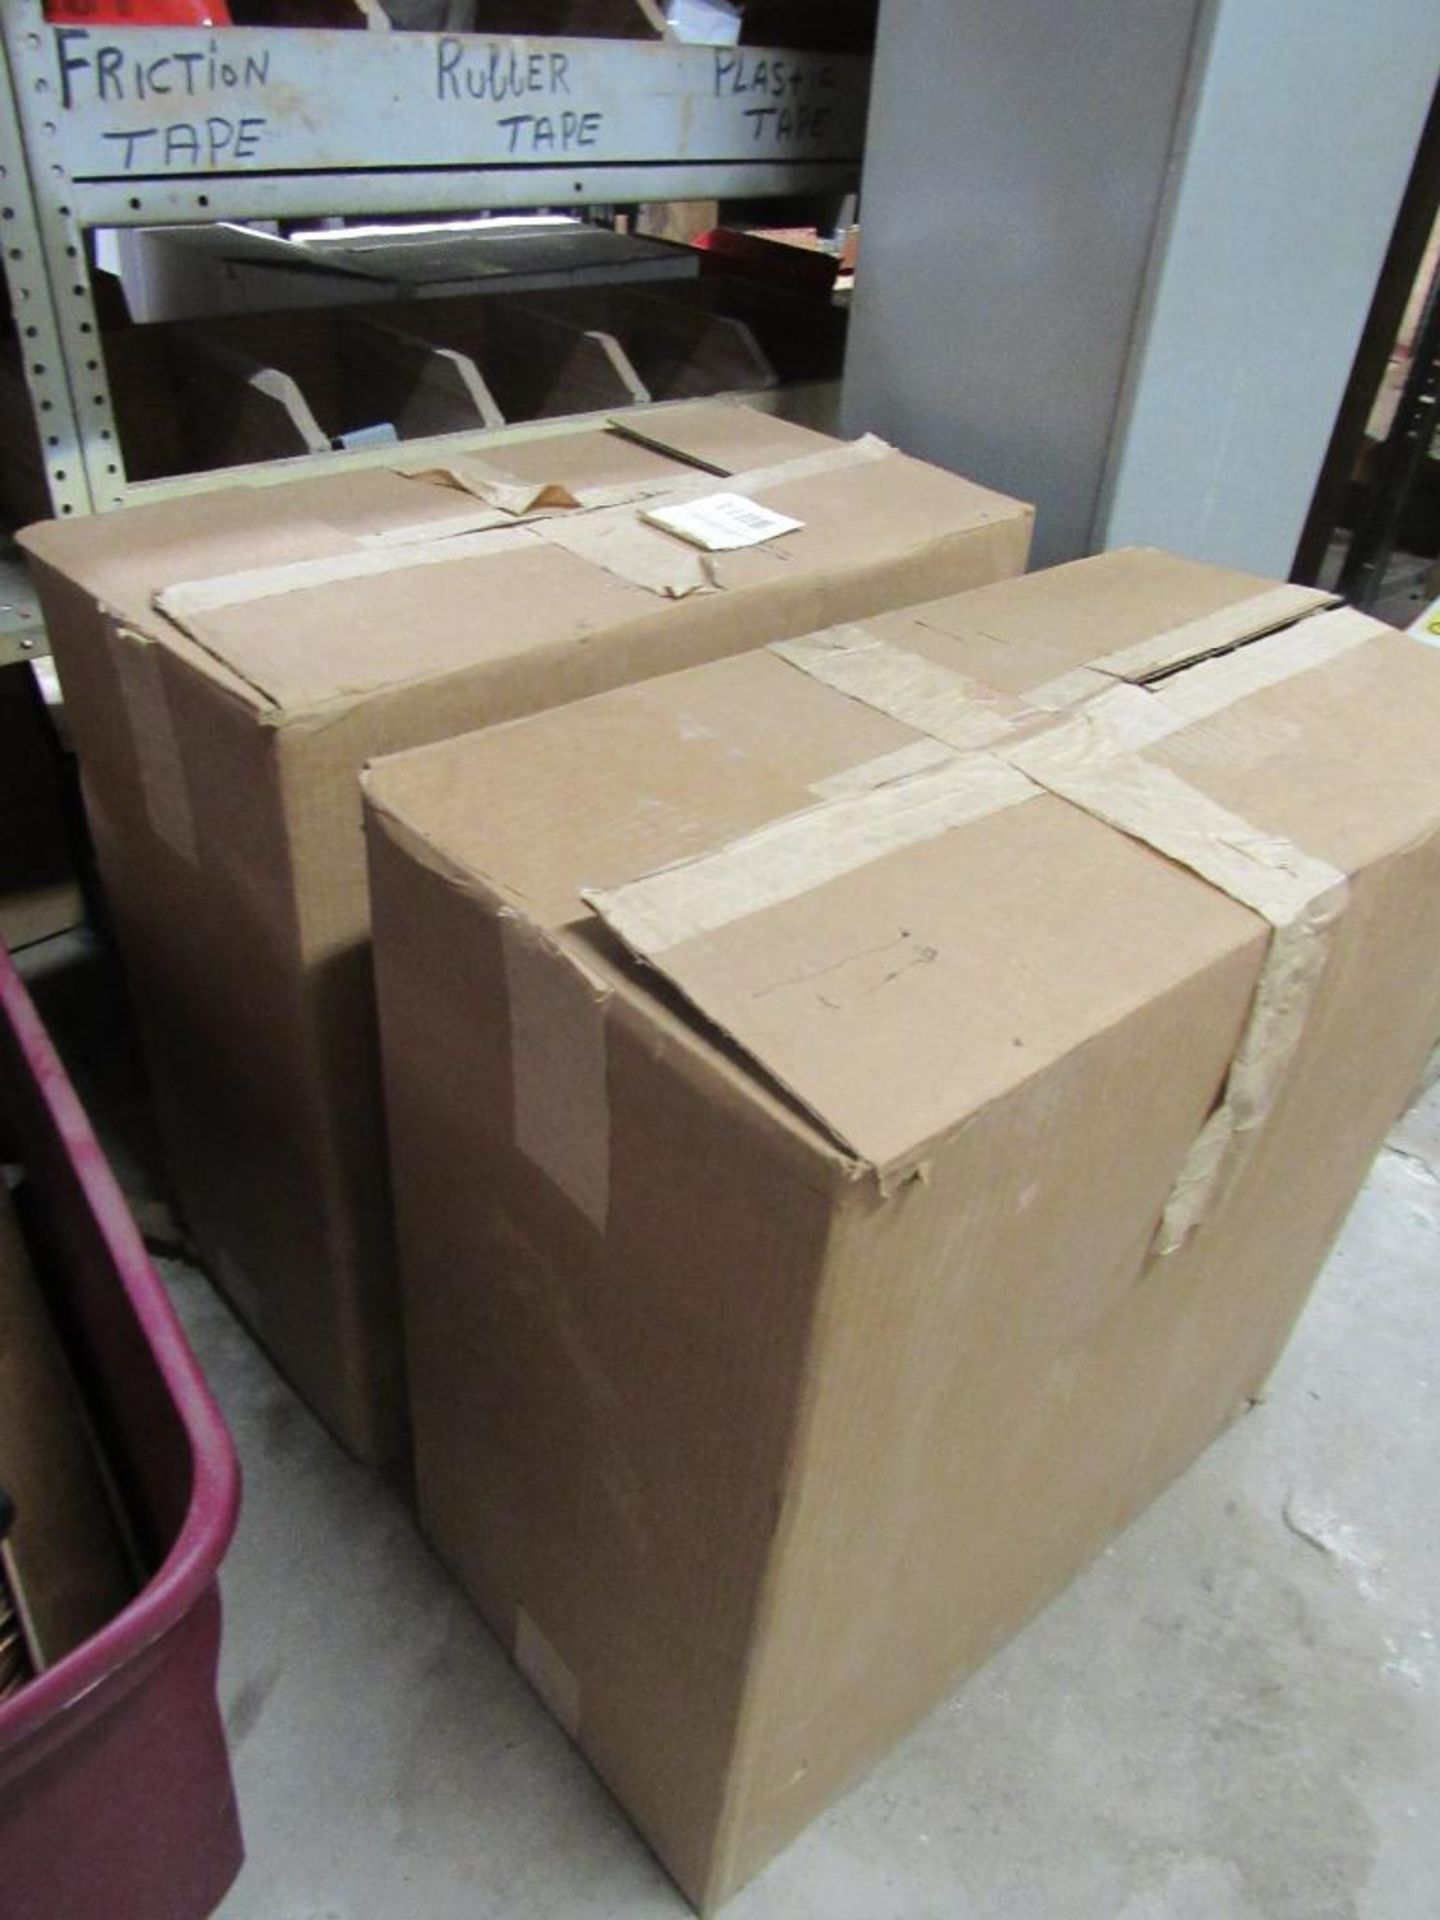 Lot of 2: J-Boxes, 24" x 24" x 12" deep - new in box